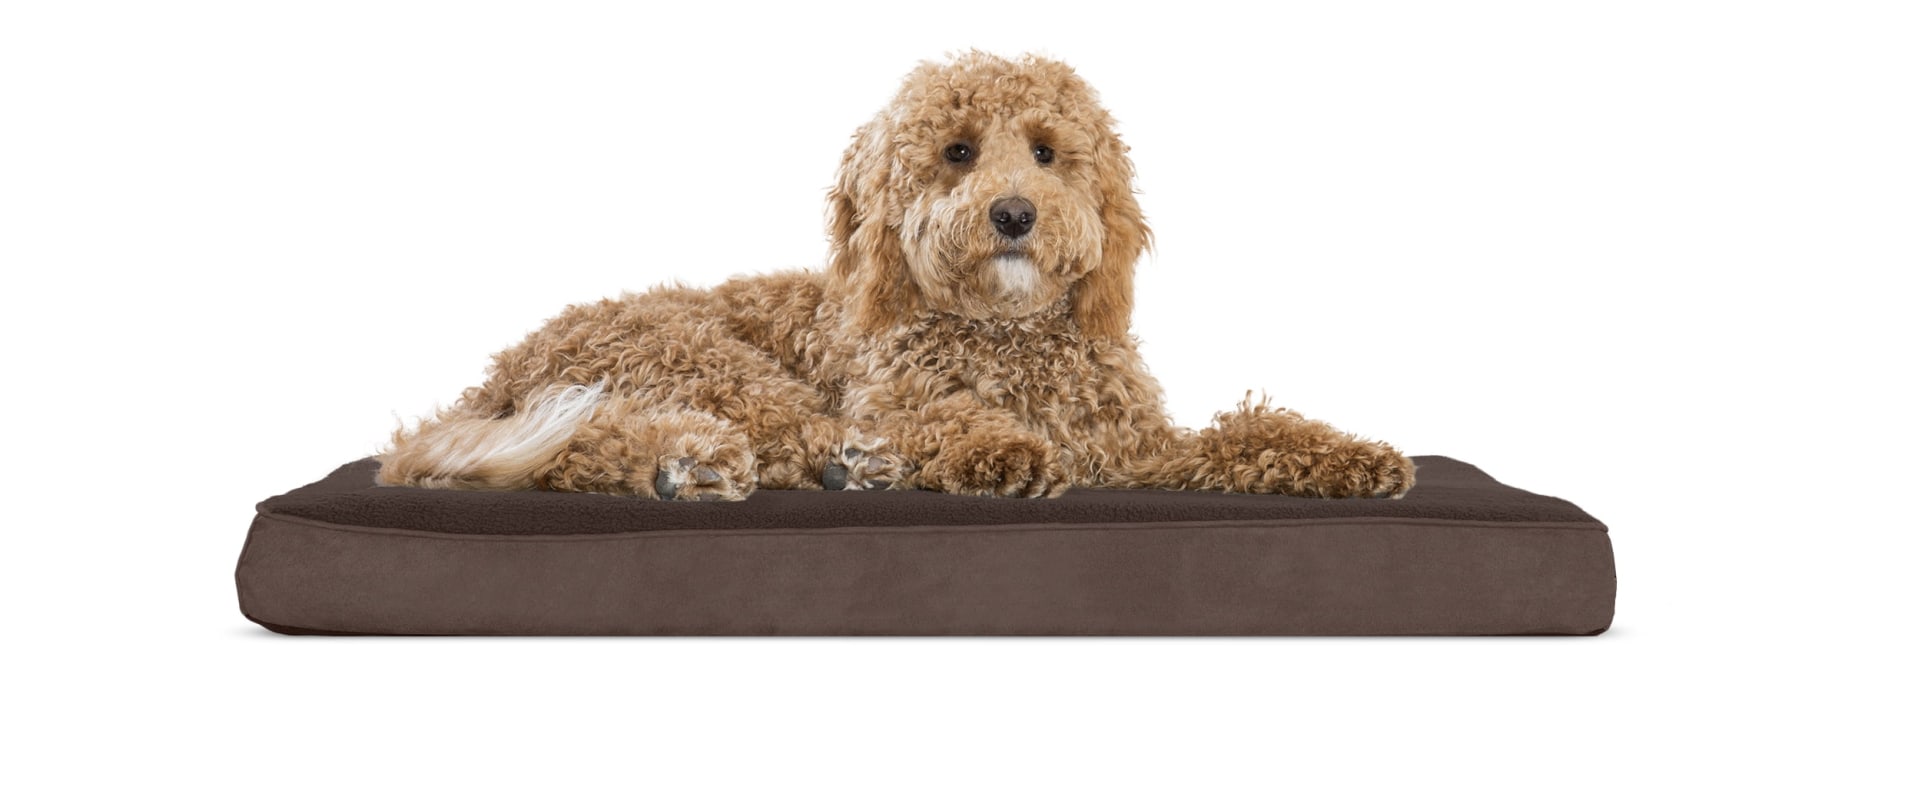 Can Orthopedic Pet Beds Help with Joint Pain in Pets?